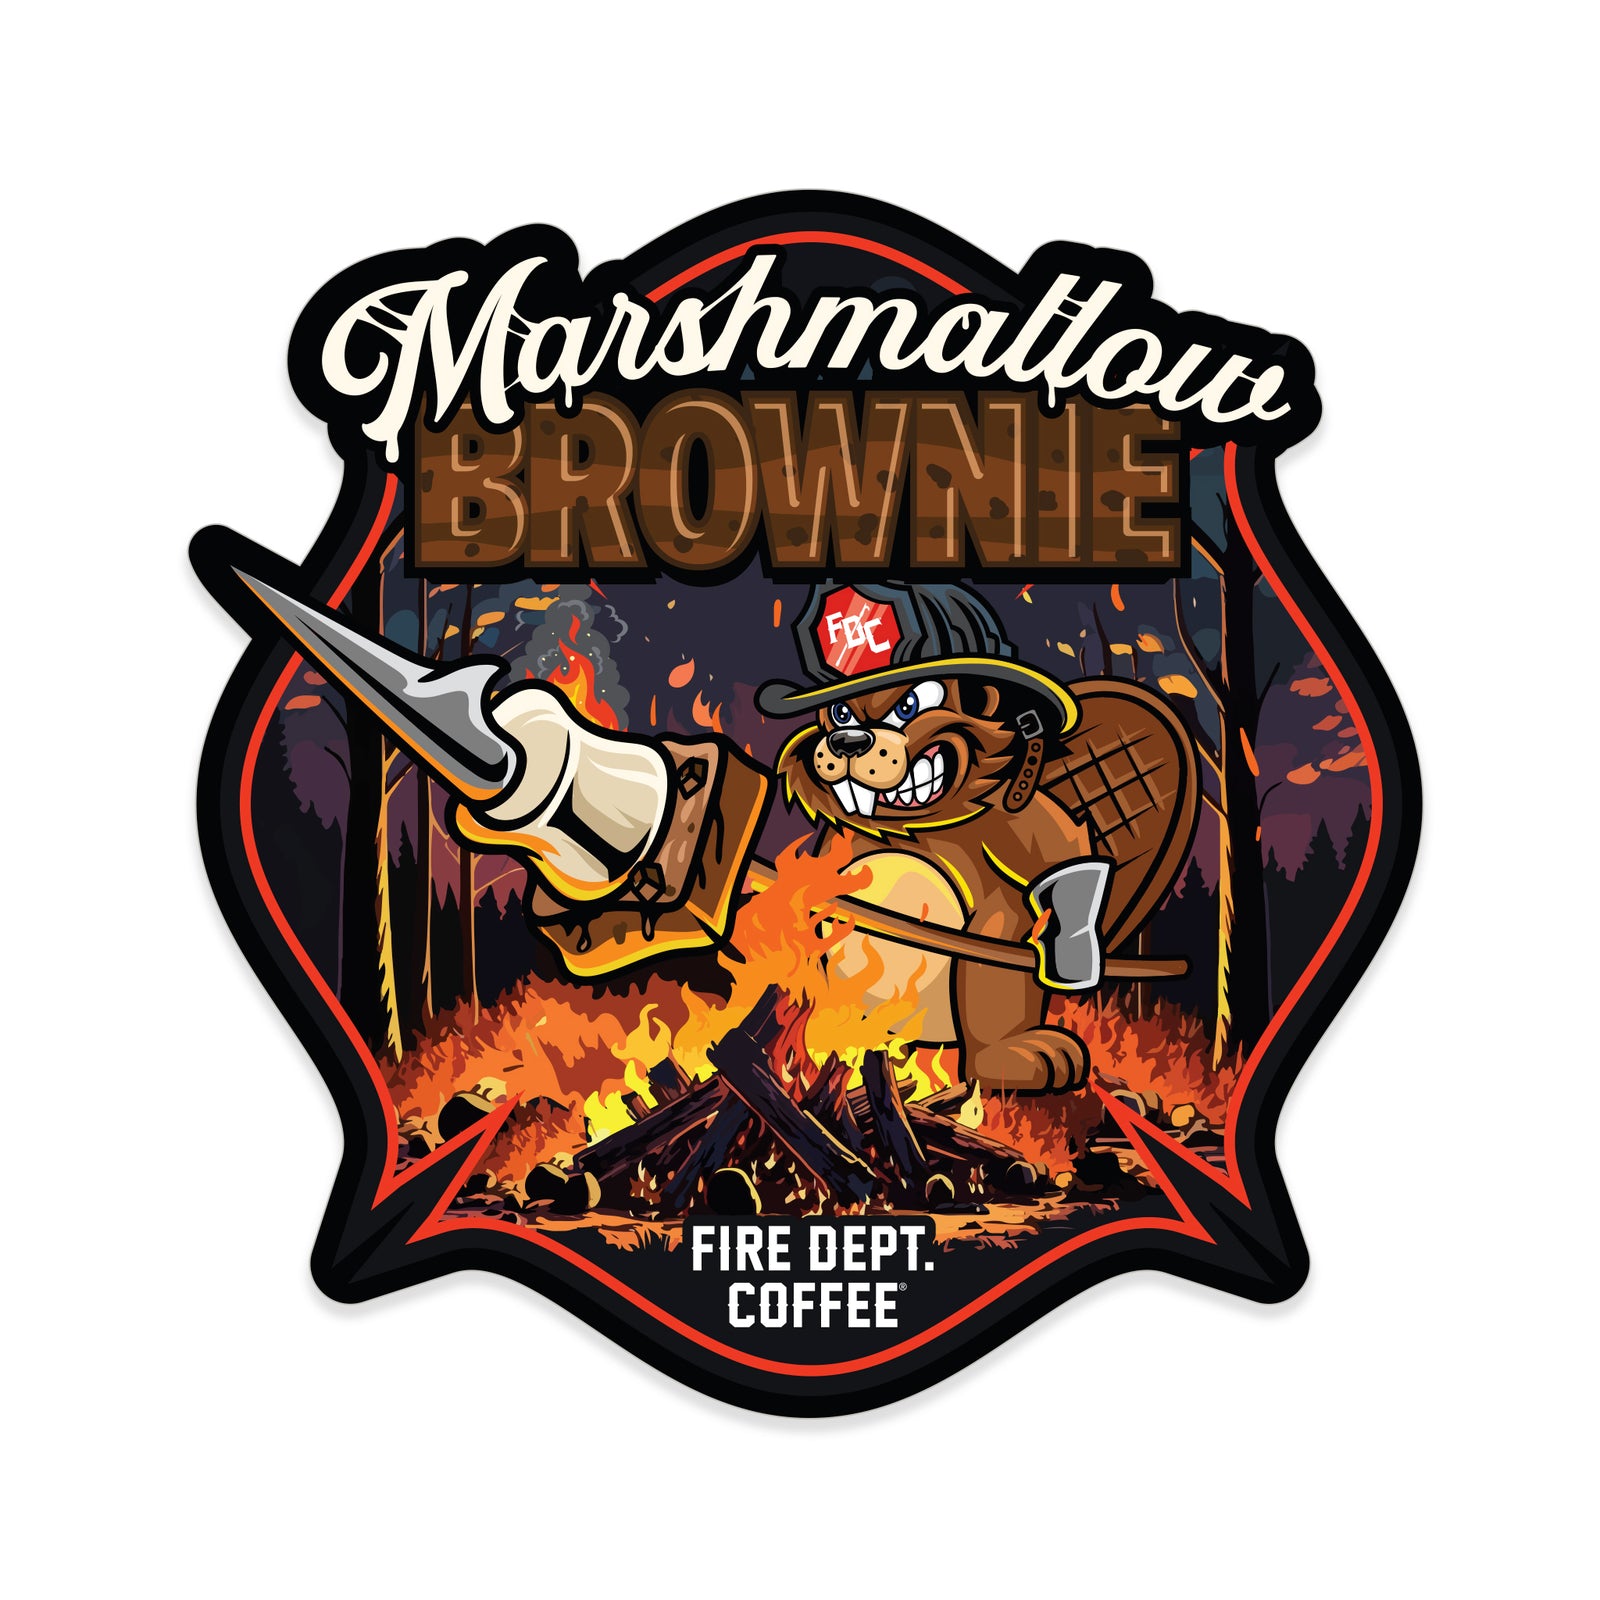 An illustration of a beaver roasting a marshmallow over an open flame with text that reads MARSHMALLOW BROWNIE